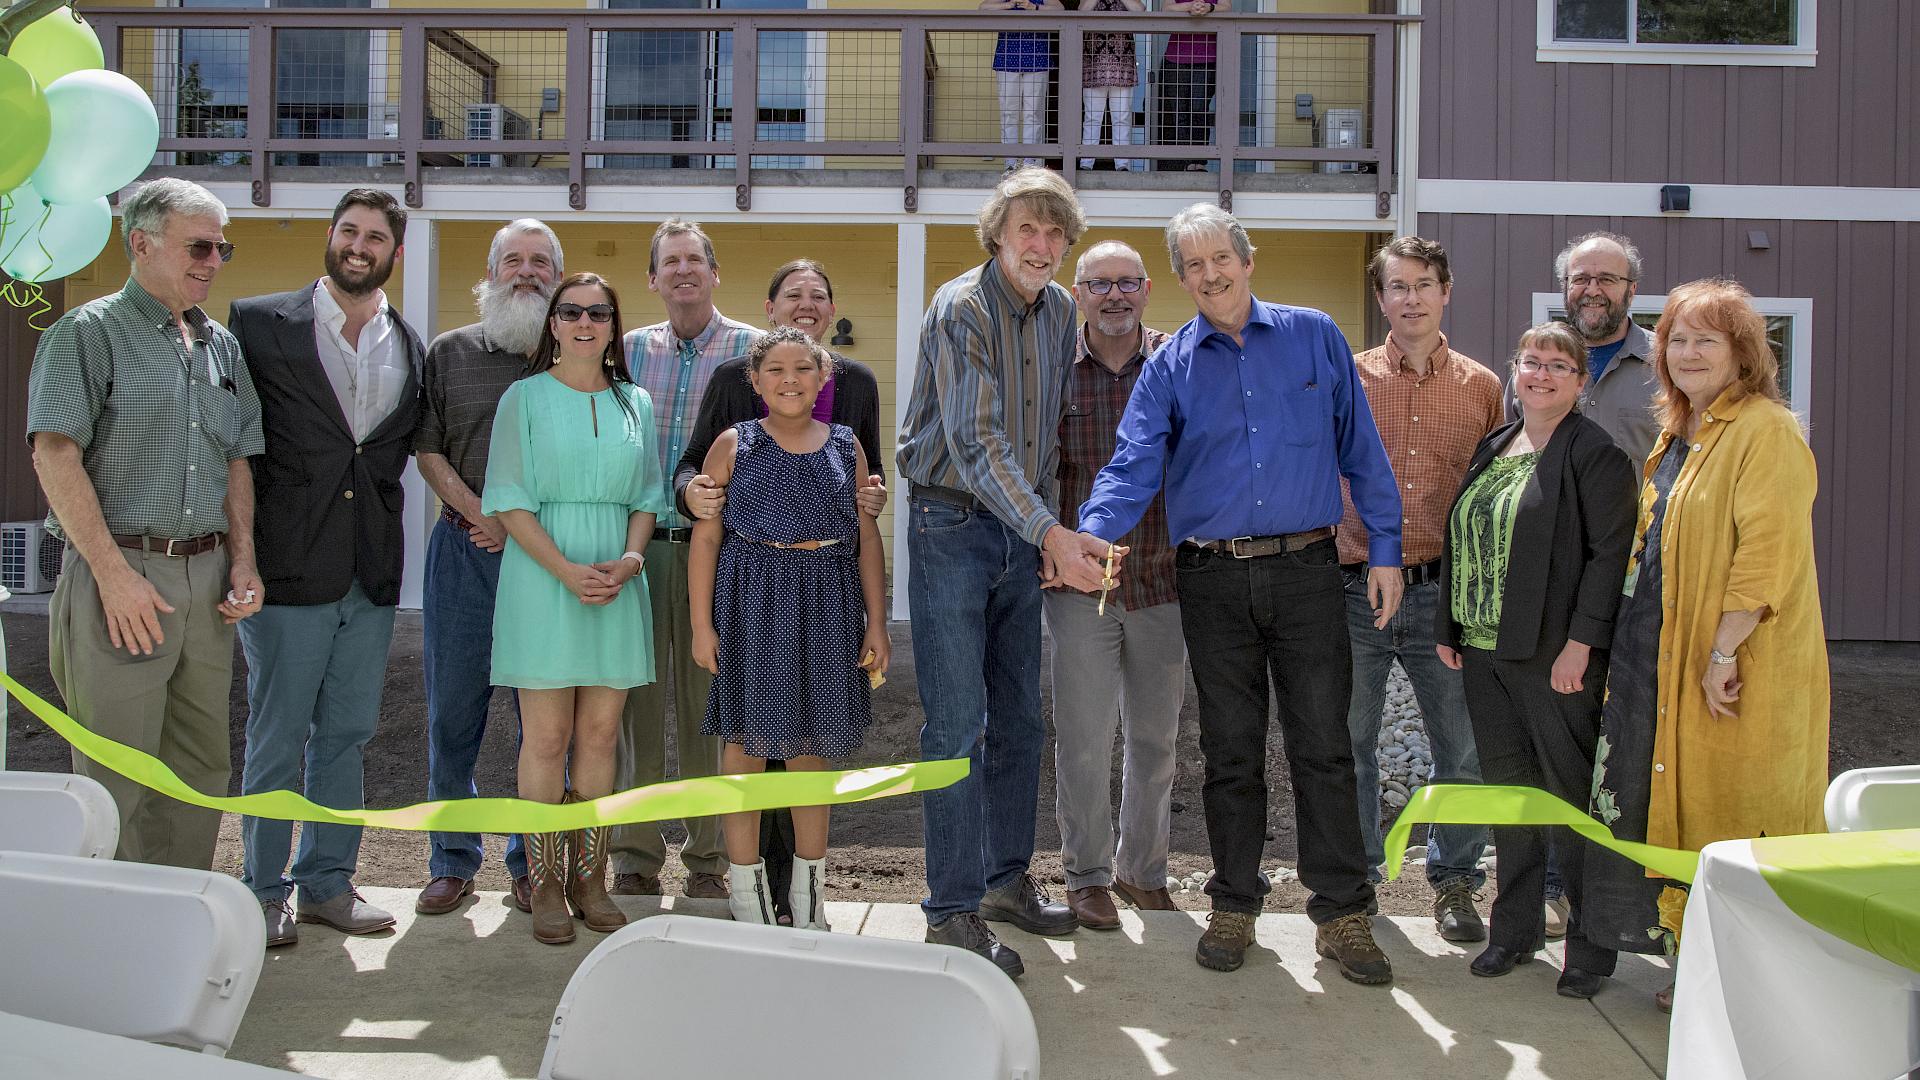 The ribbon cutting with Rural Communities Housing Development and partners. slide image